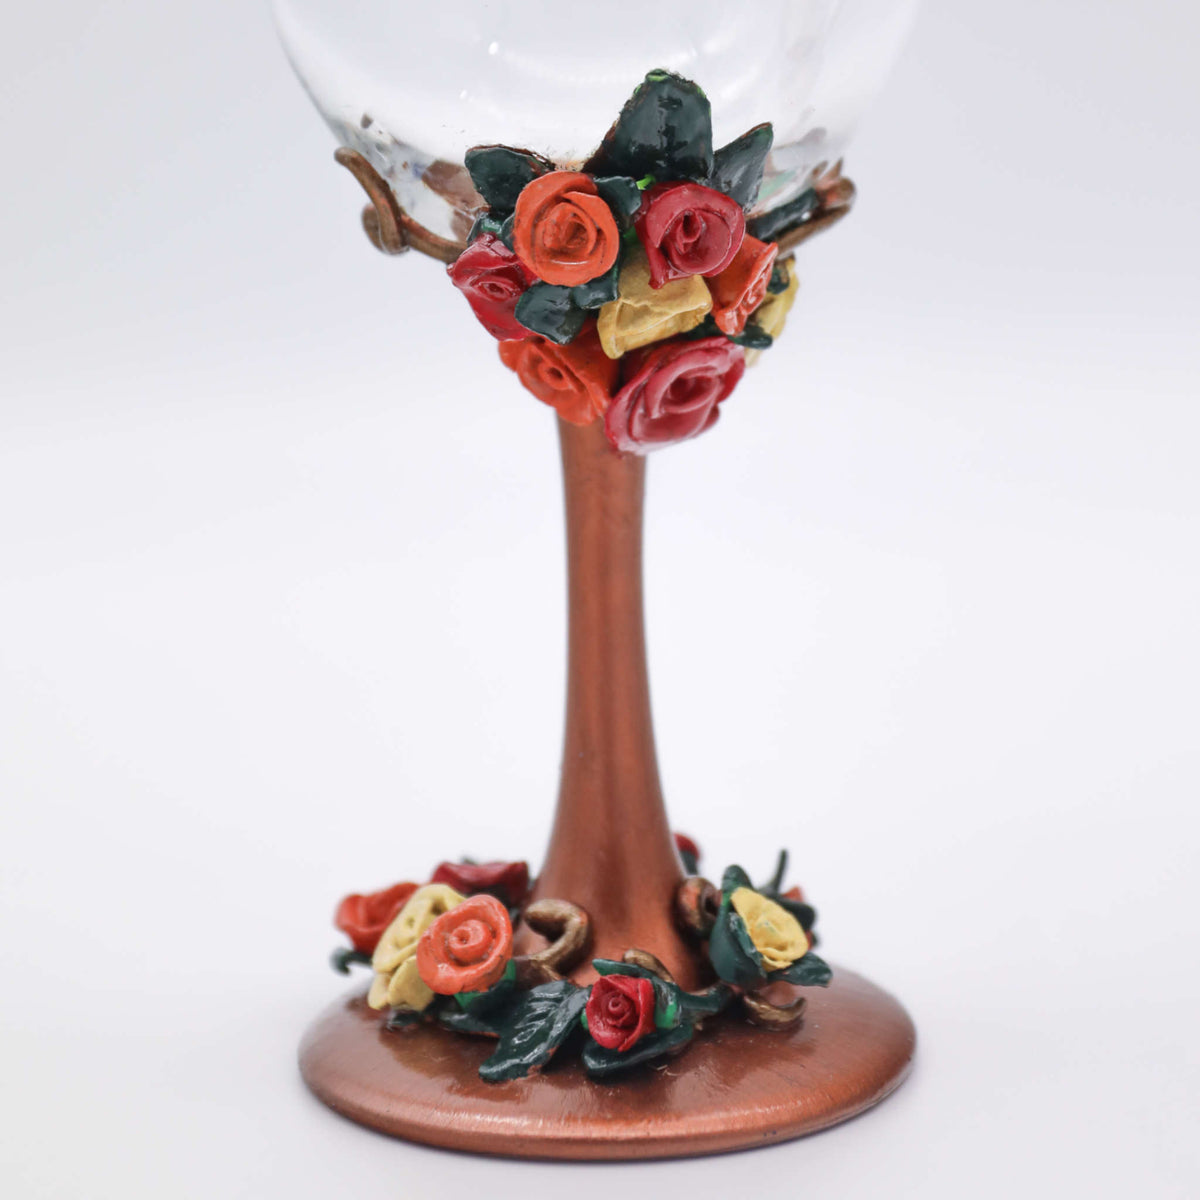 Each wine glass sits atop of rich metallic copper stem and is adorned with polymer clay flowers in red, orange, and yellow flowers within green leaves and vines.